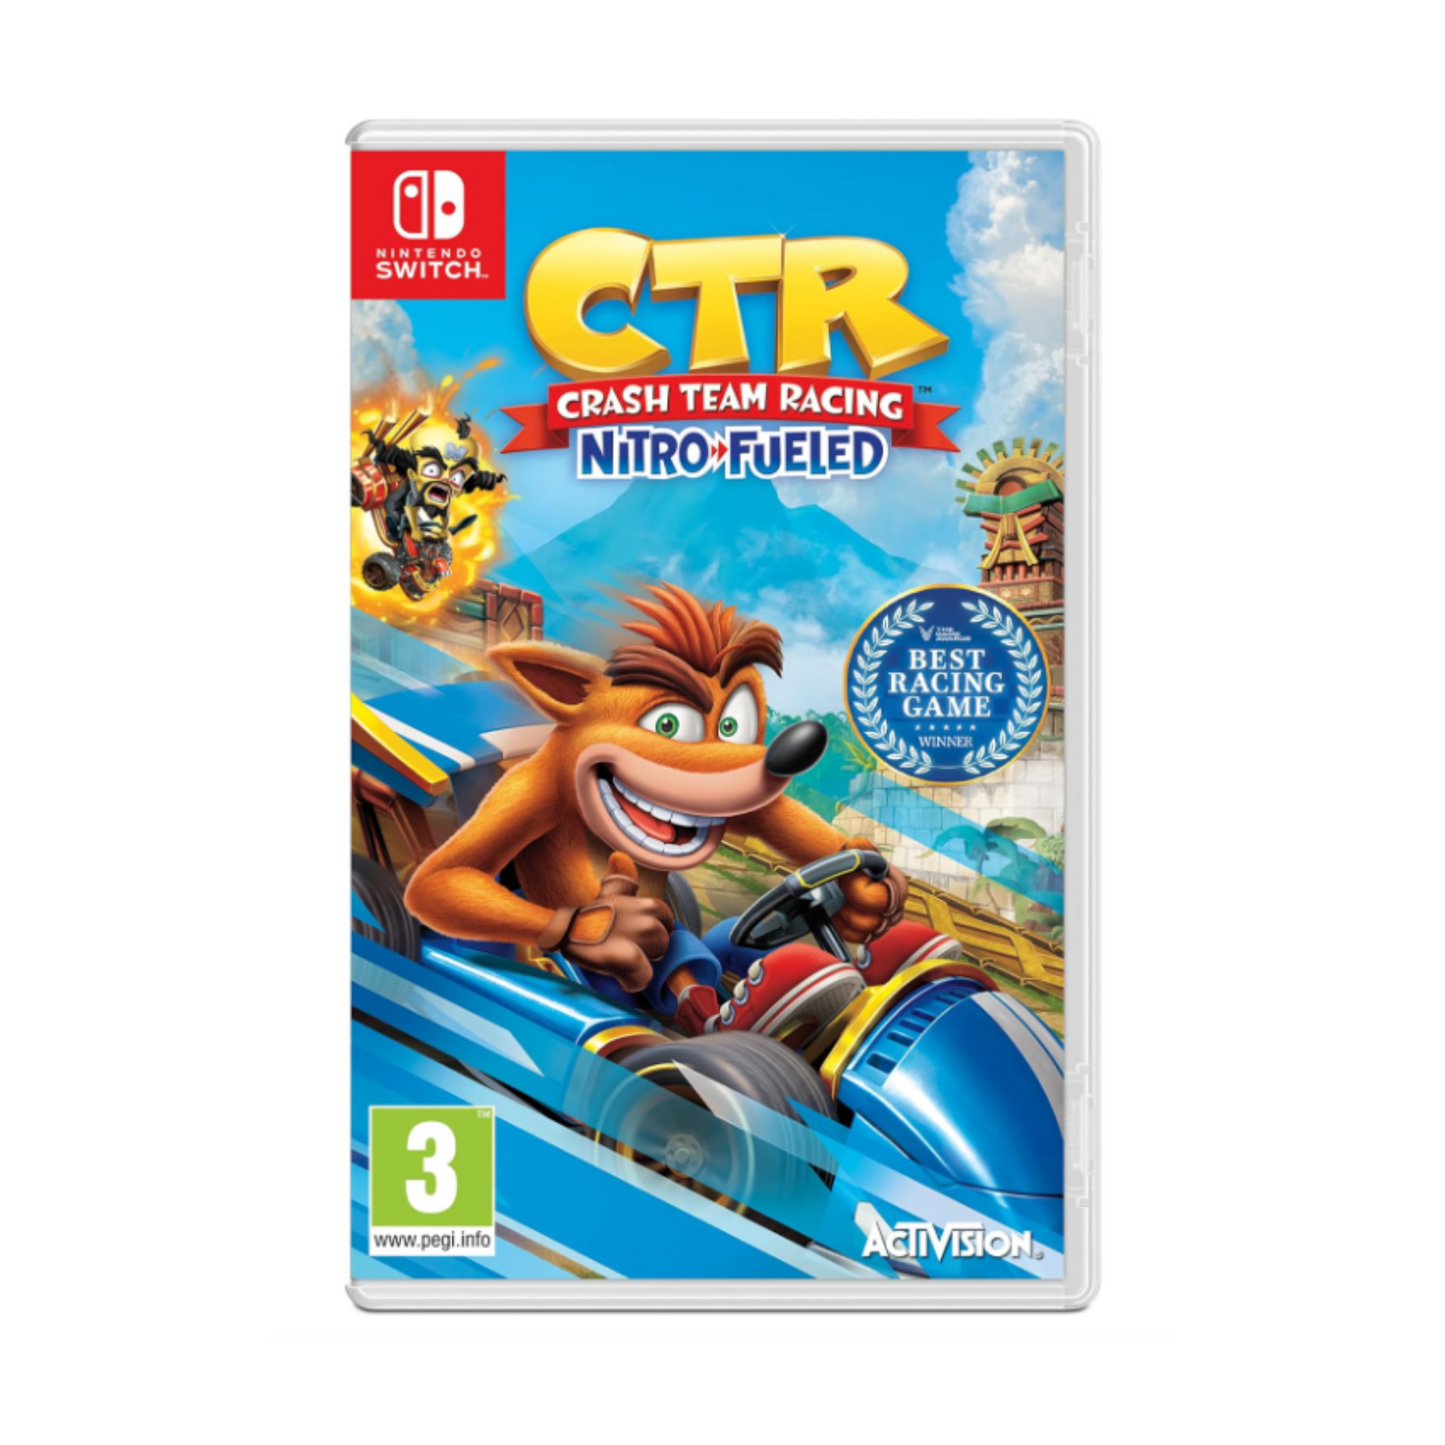 Crash team Racing Nitro Fueled video game for Nintendo Switch